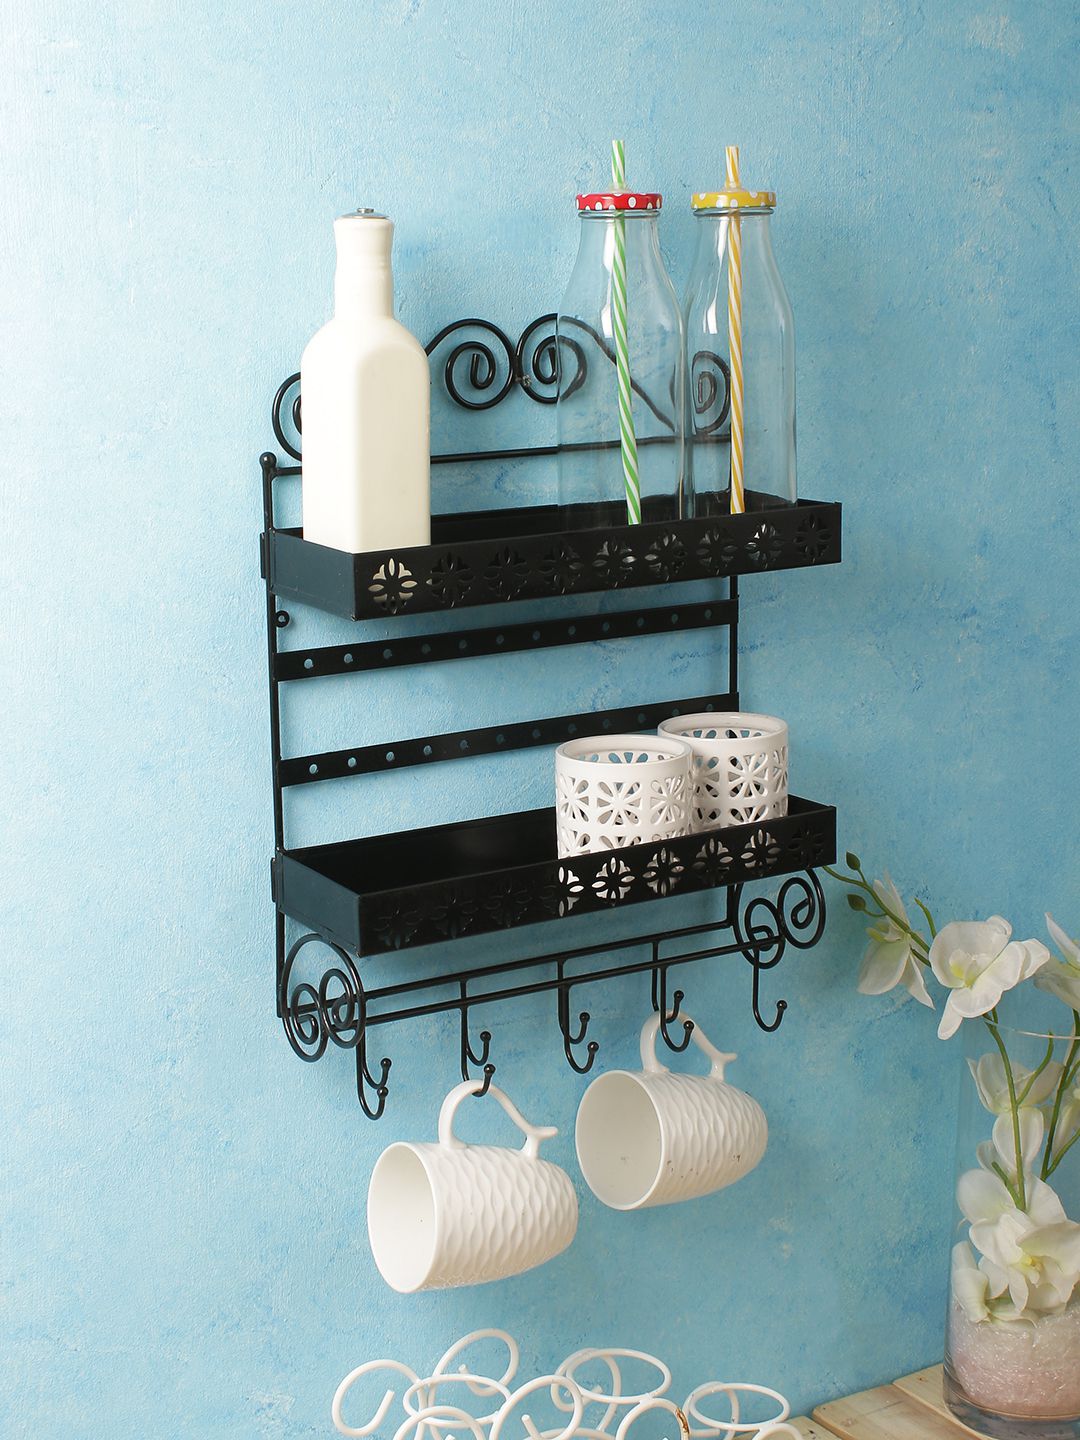 Home Sparkle Kitchen Wall Rack Mild Steel Black Buy Home Sparkle Kitchen Wall Rack Mild Steel Black Online At Low Price Snapdeal